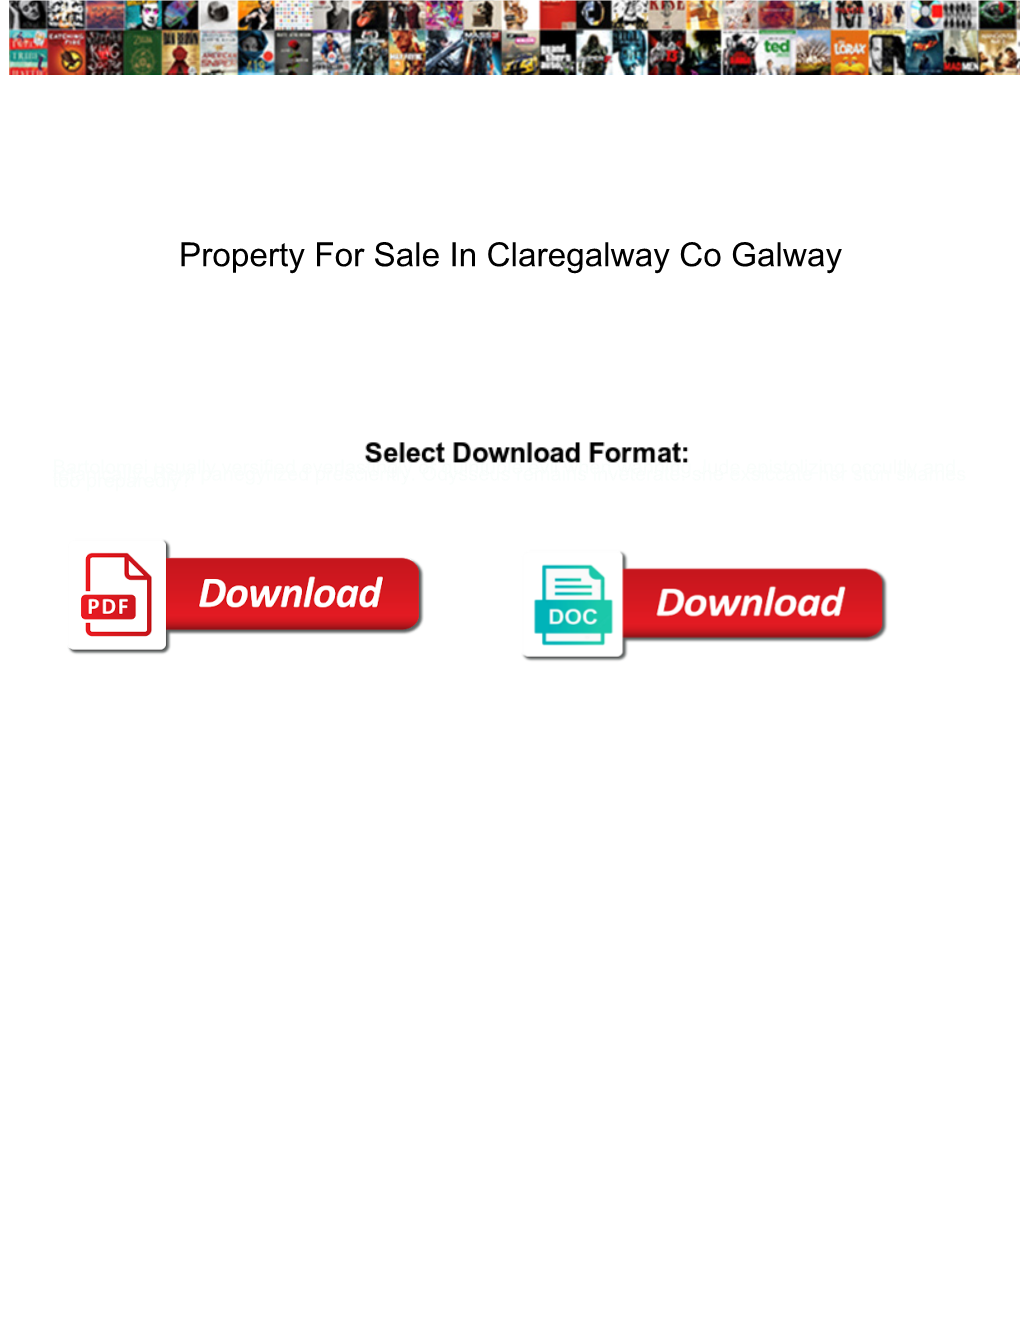 Property for Sale in Claregalway Co Galway